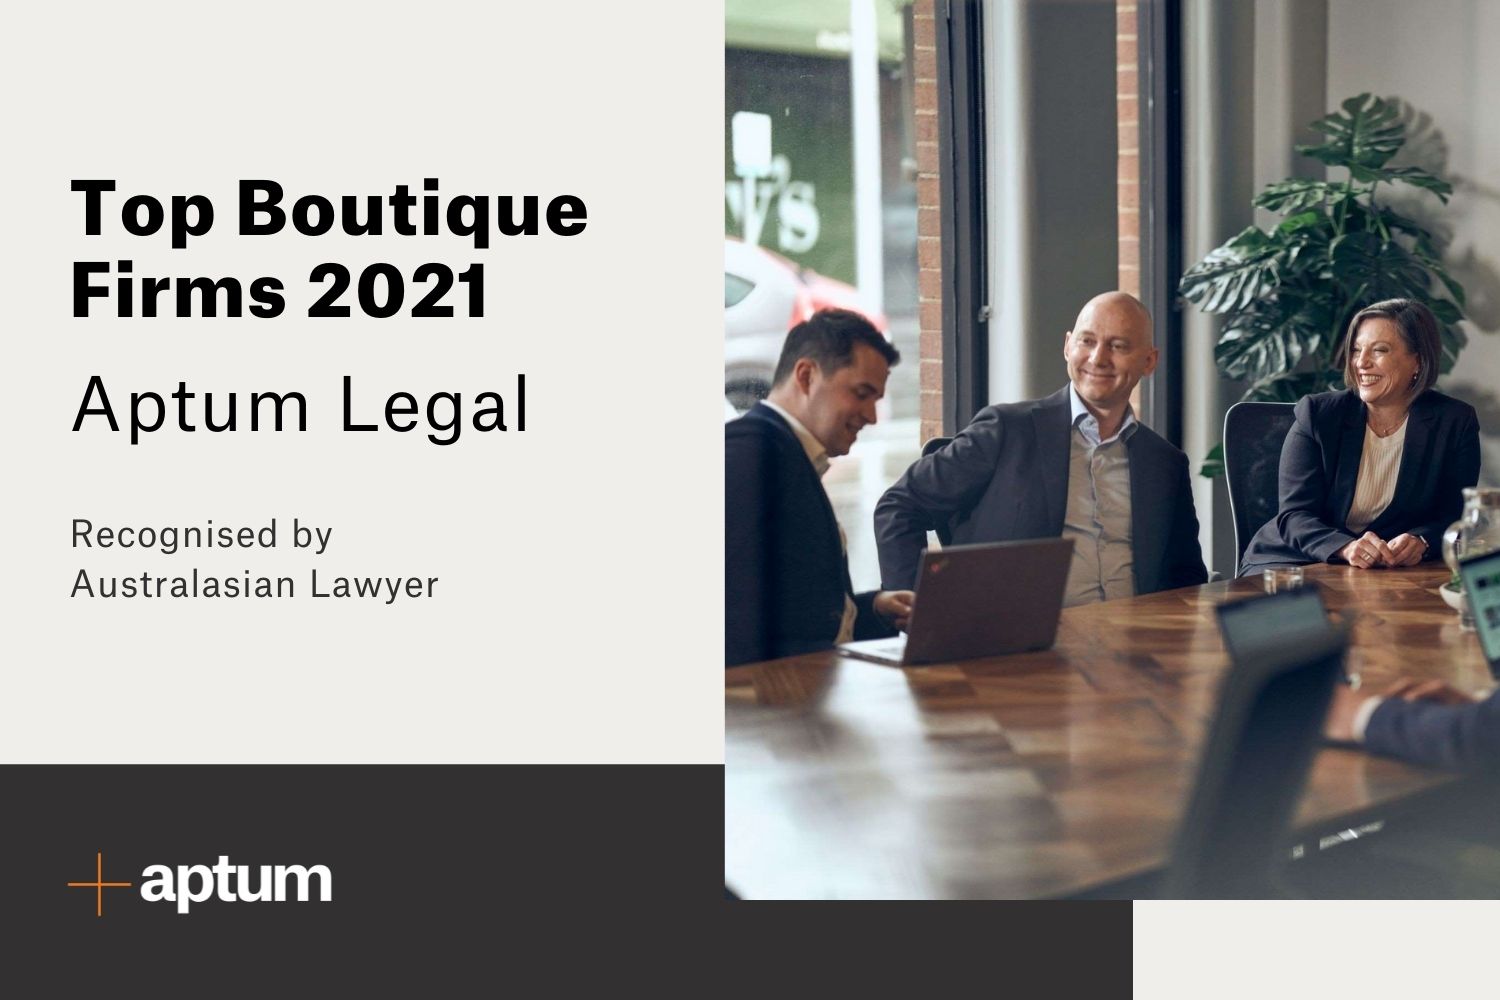 A graphic representing 'Top Boutique Firms 2021 Aptum Legal as recognised by Australasian Lawyer', accompanied by a photo of the Aptum team